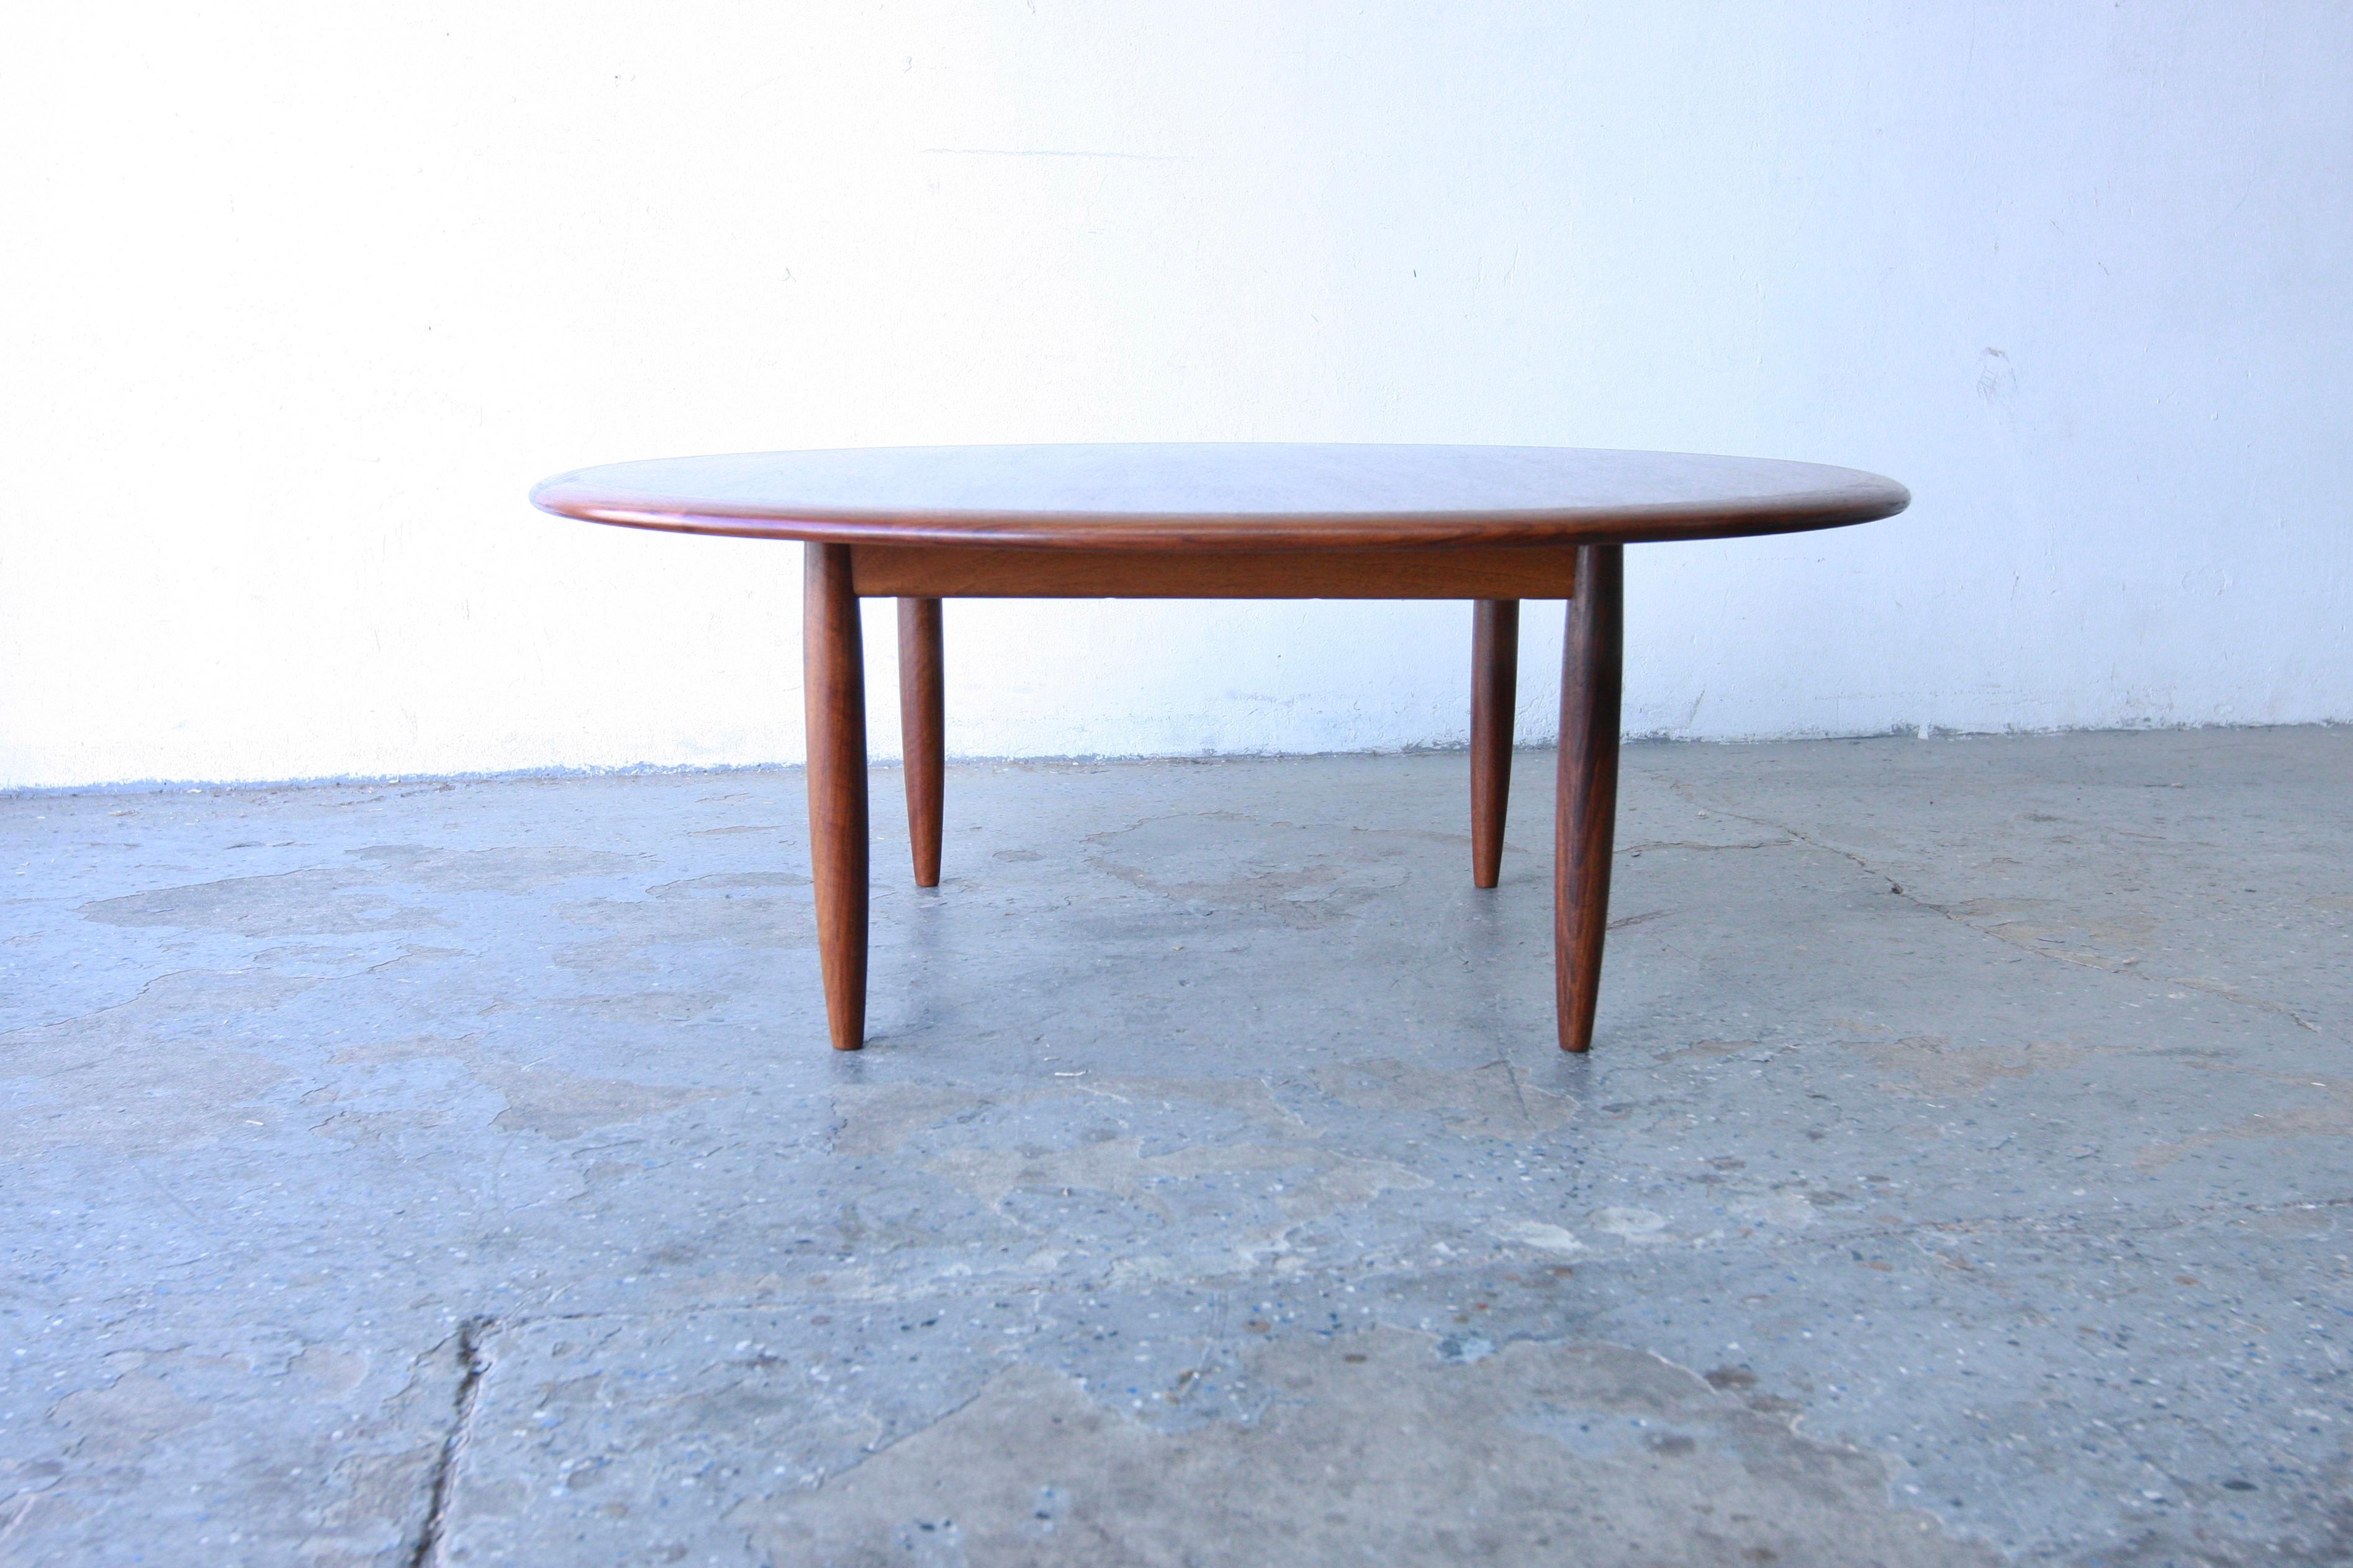  Mid Century Jewells Presents  this  Gunner Schwarz of Los Angeles Restored 1960s Danish Modern Walnut Coffee Table!
Note the Beautiful walnut wood grain. You just can’t find coffee tables like this today. The workmanship is just stunning. 
The